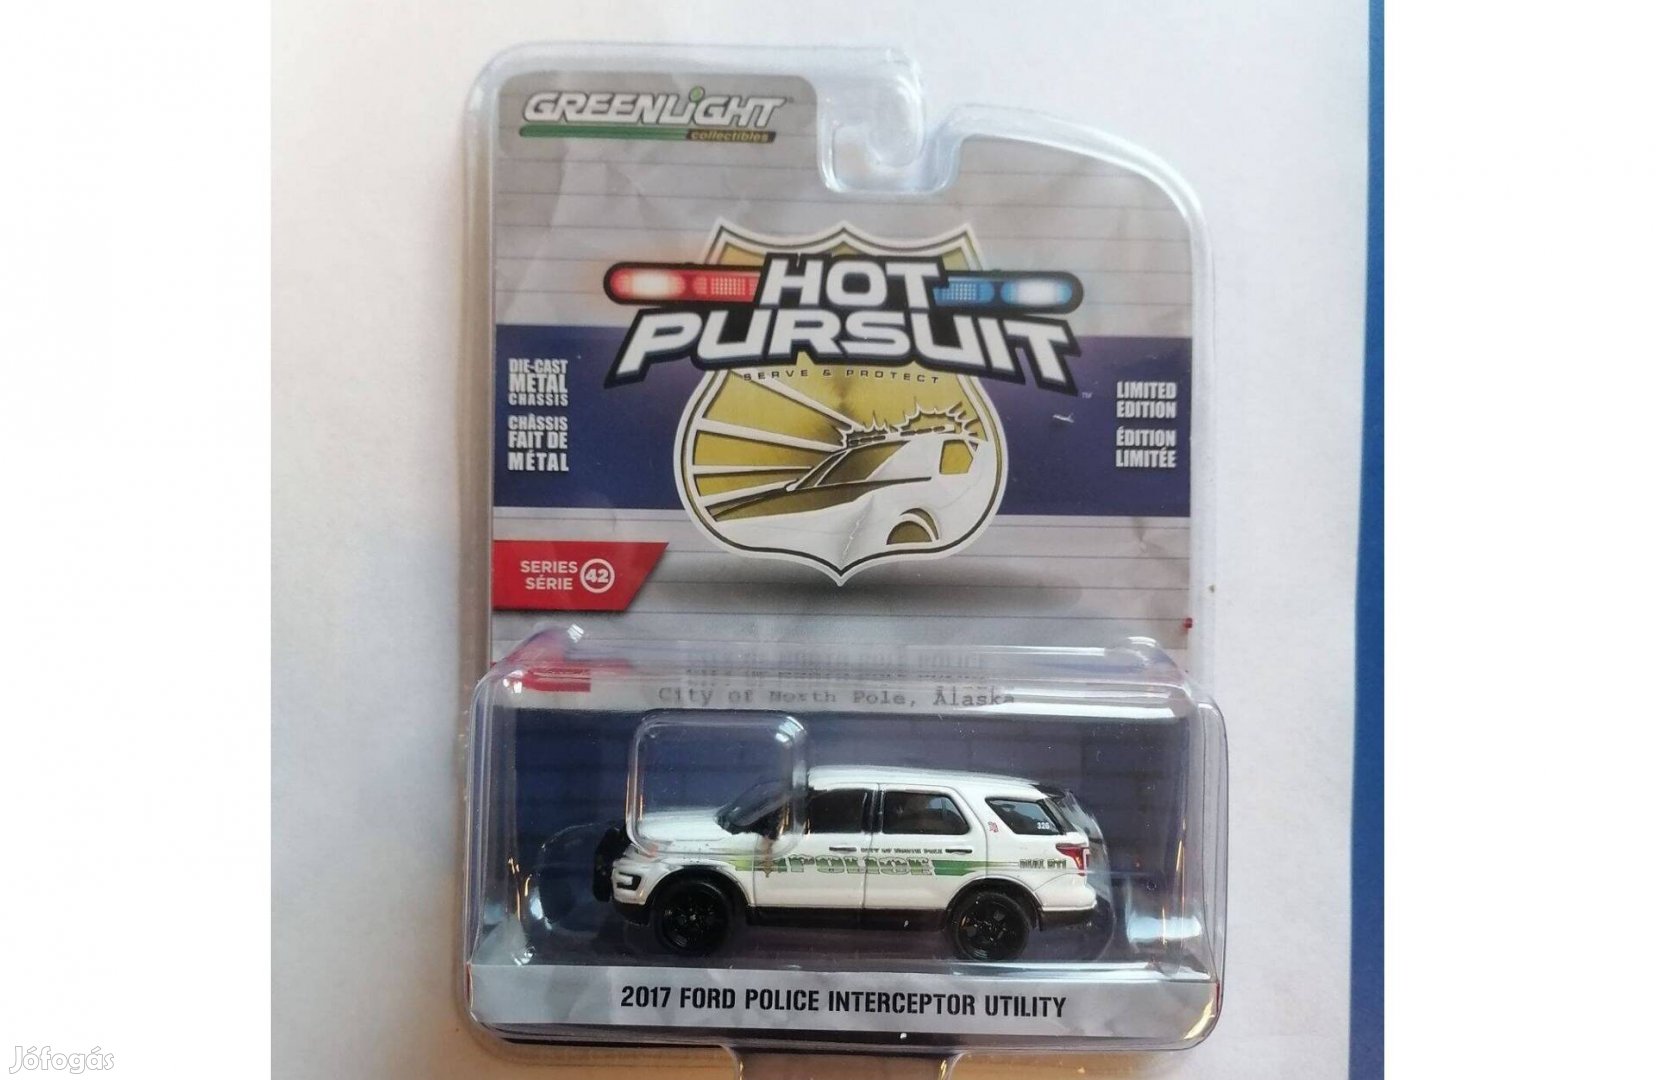 Greenlight hot pursuit series 42 2017 Ford Police Interceptor Utility